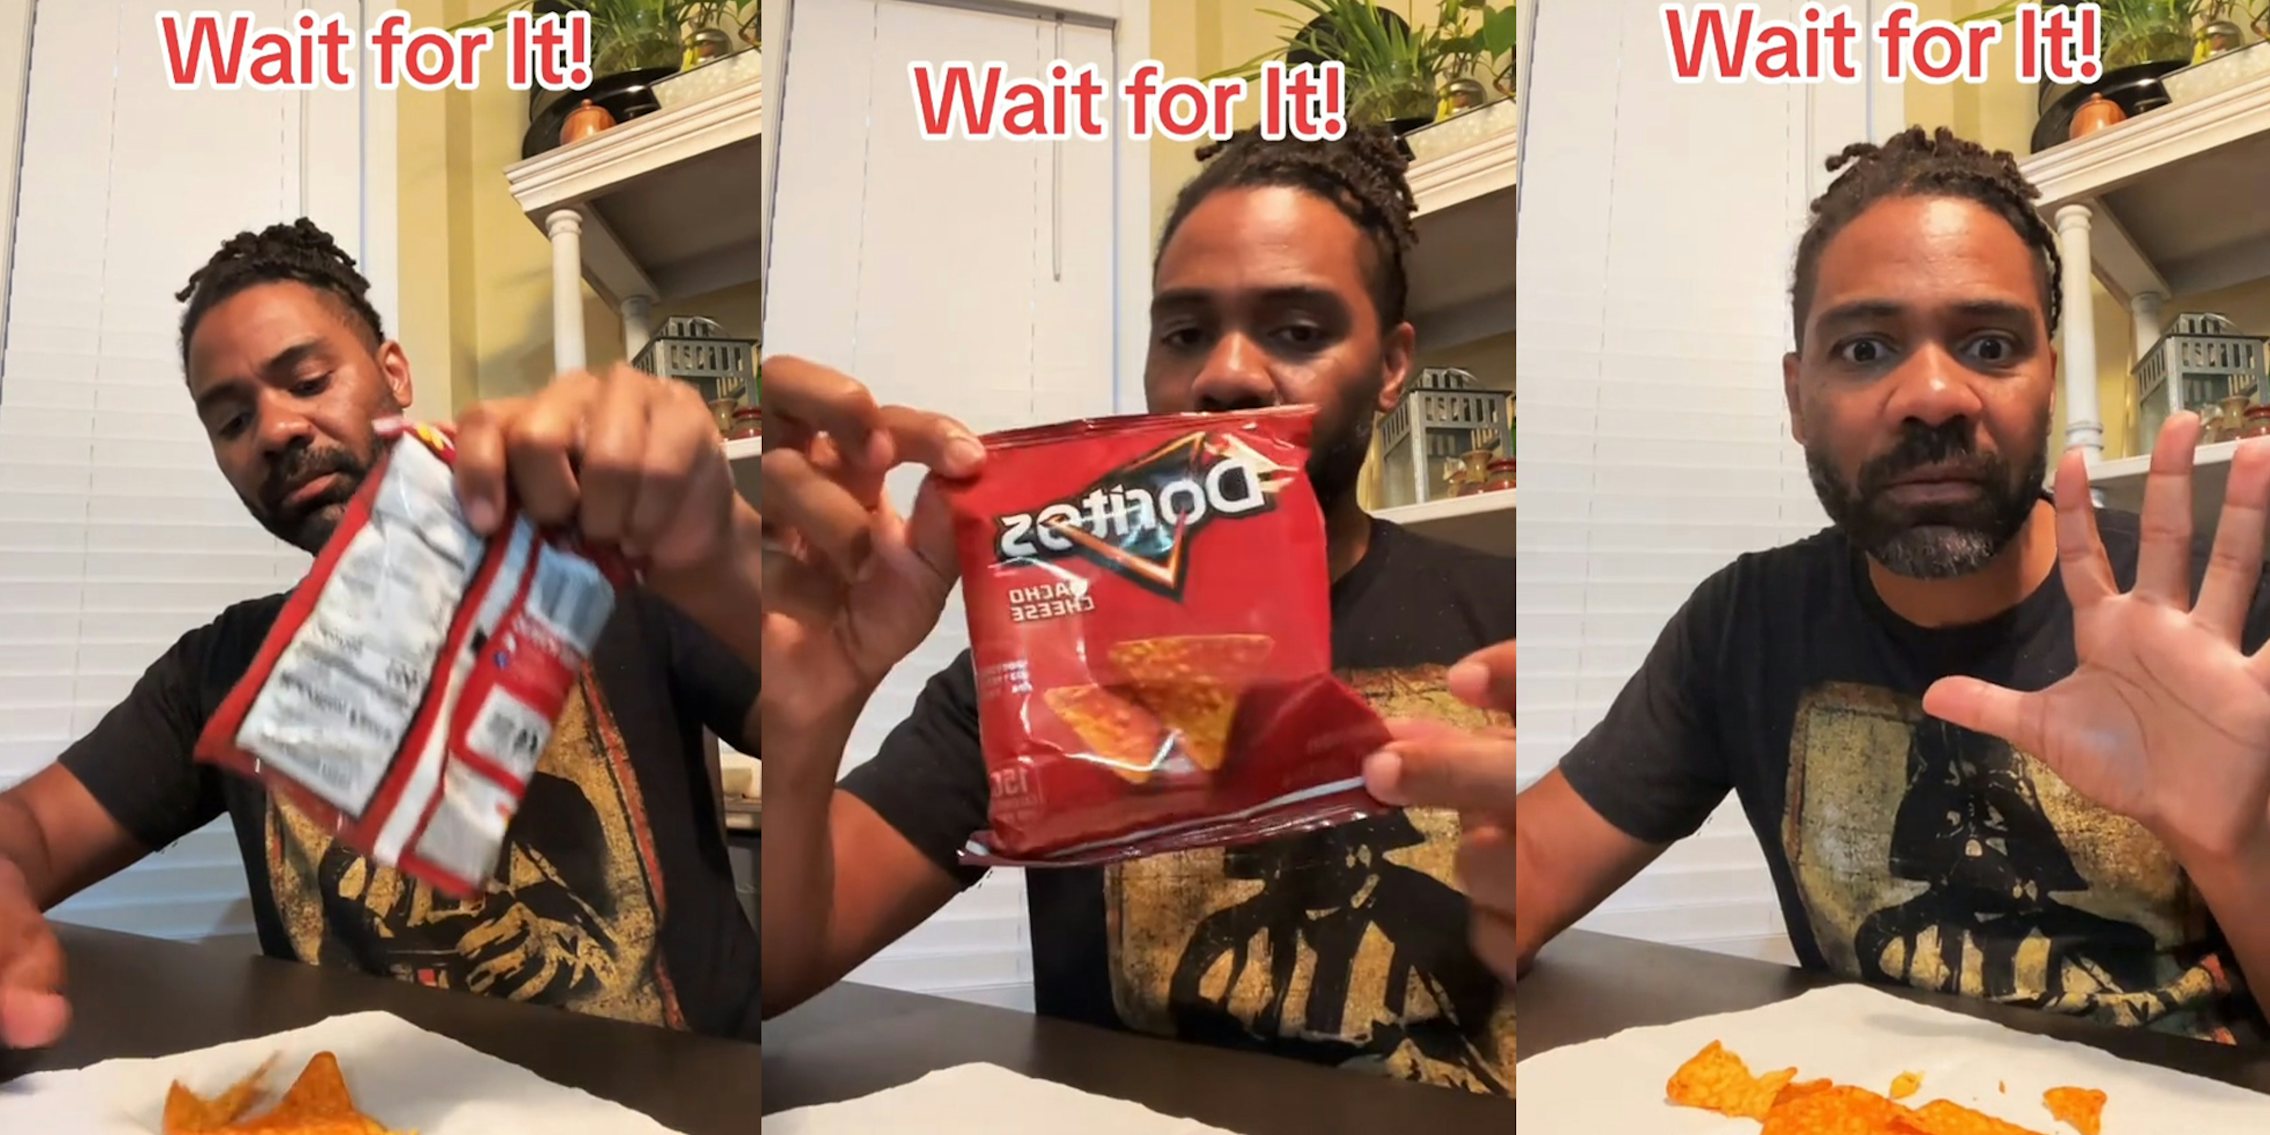 Customer opens Dorito bag. There’s only 5 pieces inside